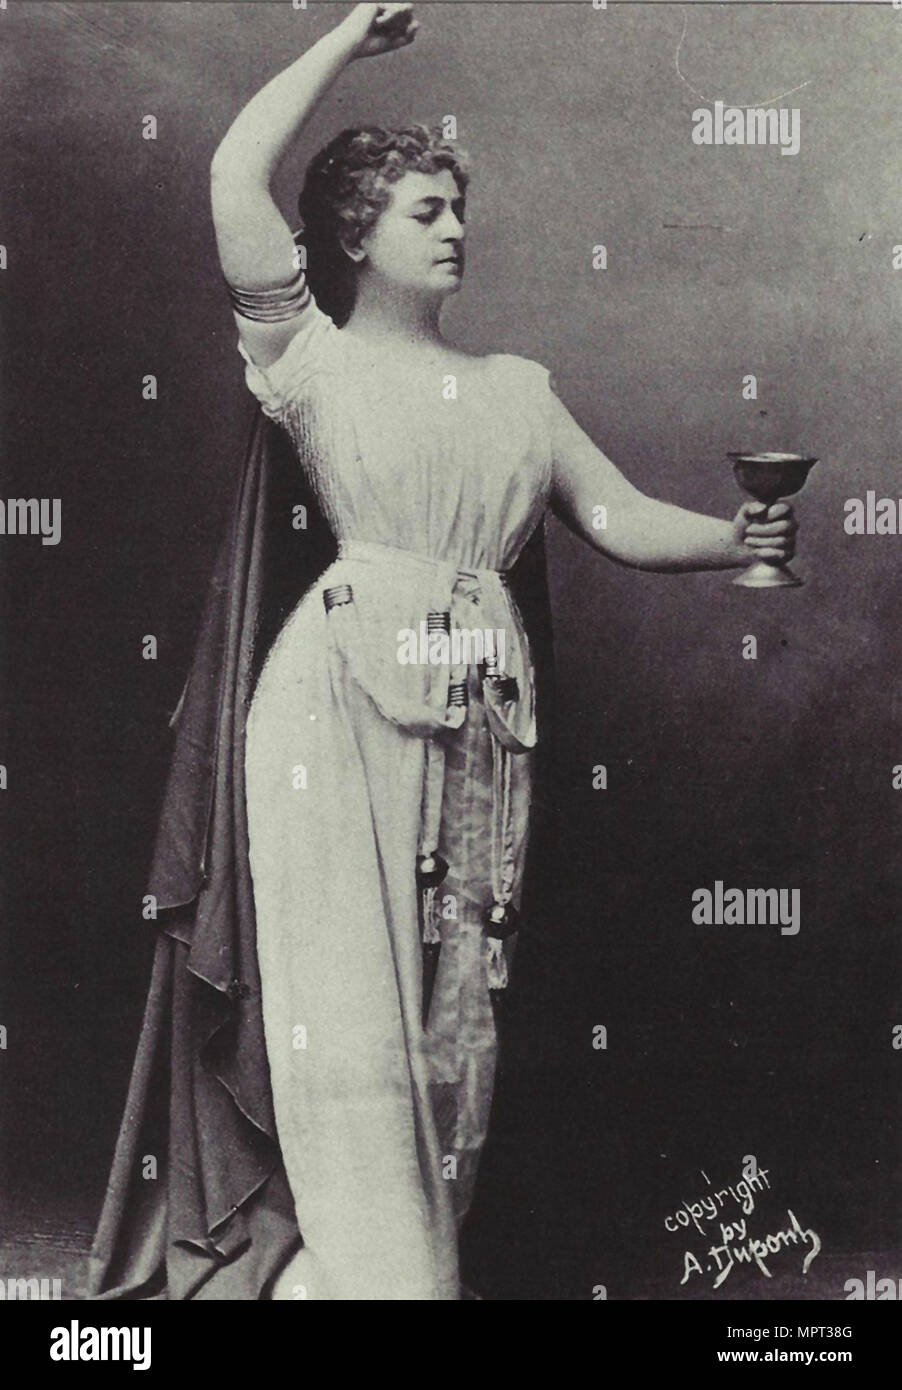 Opera singer Lilli Lehmann (1848-1929) as Isolde in Opera Tristan and Isolde by Richard Wagner, ca 1 Stock Photo